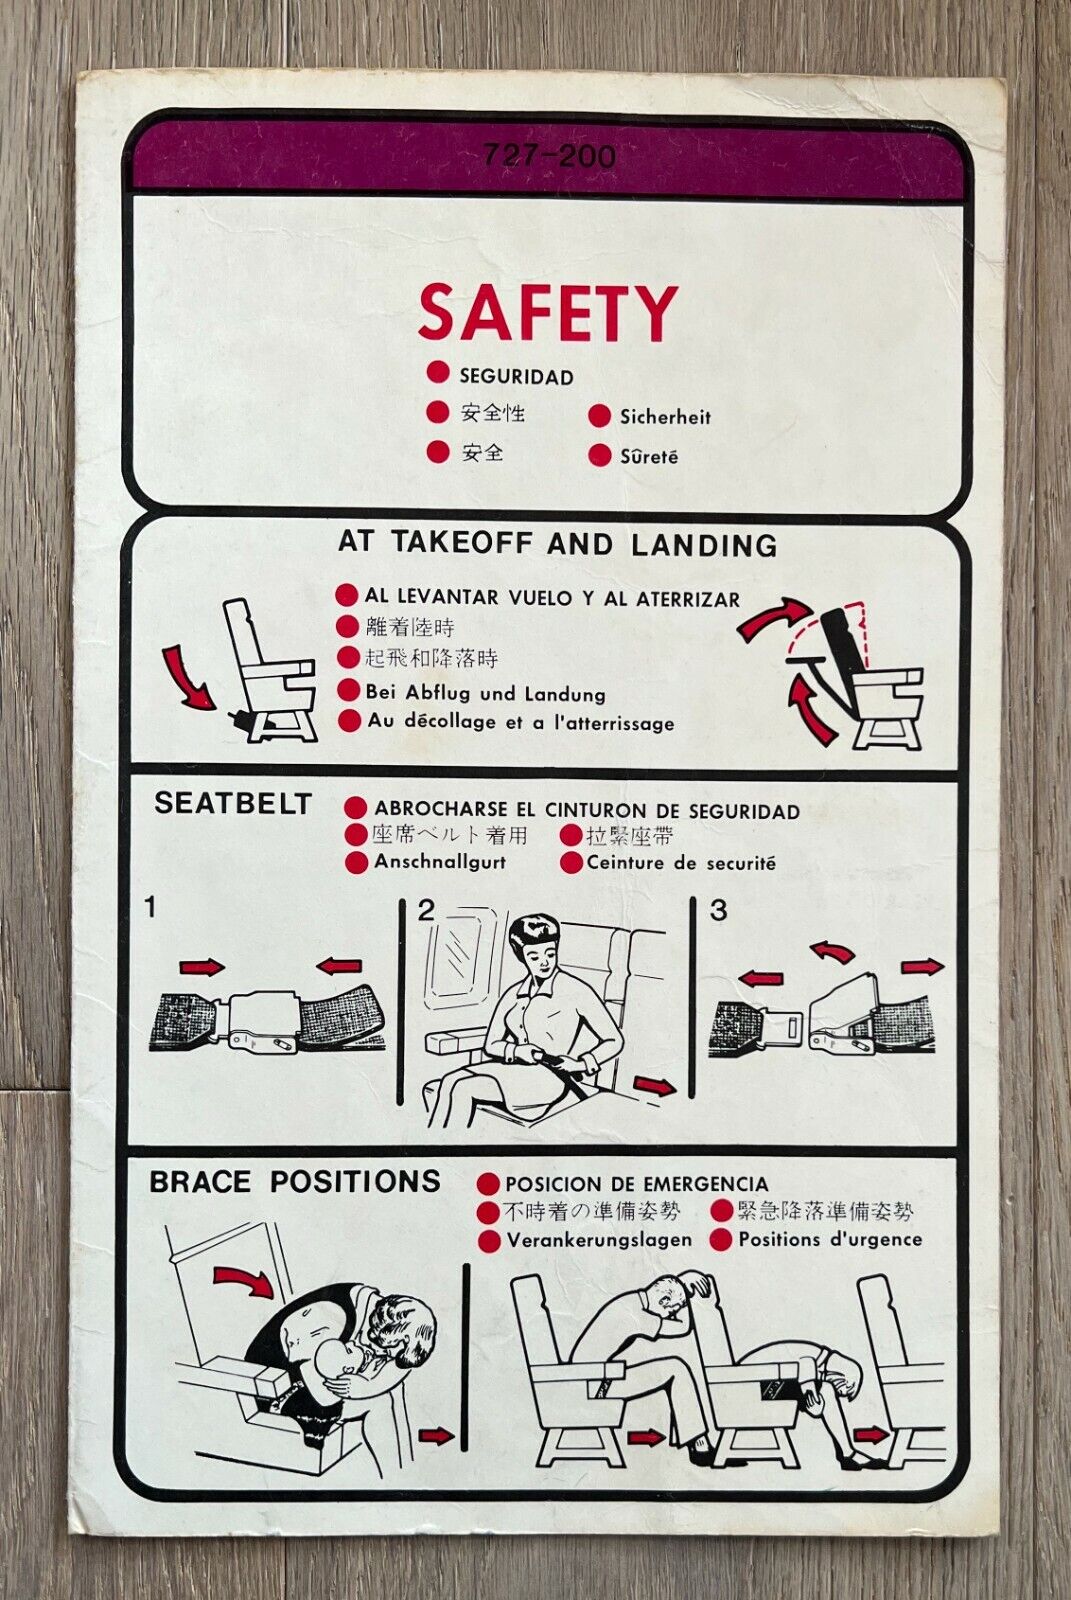 CONTINENTAL AIRLINES 727-200 SAFETY CARD 7/1/81